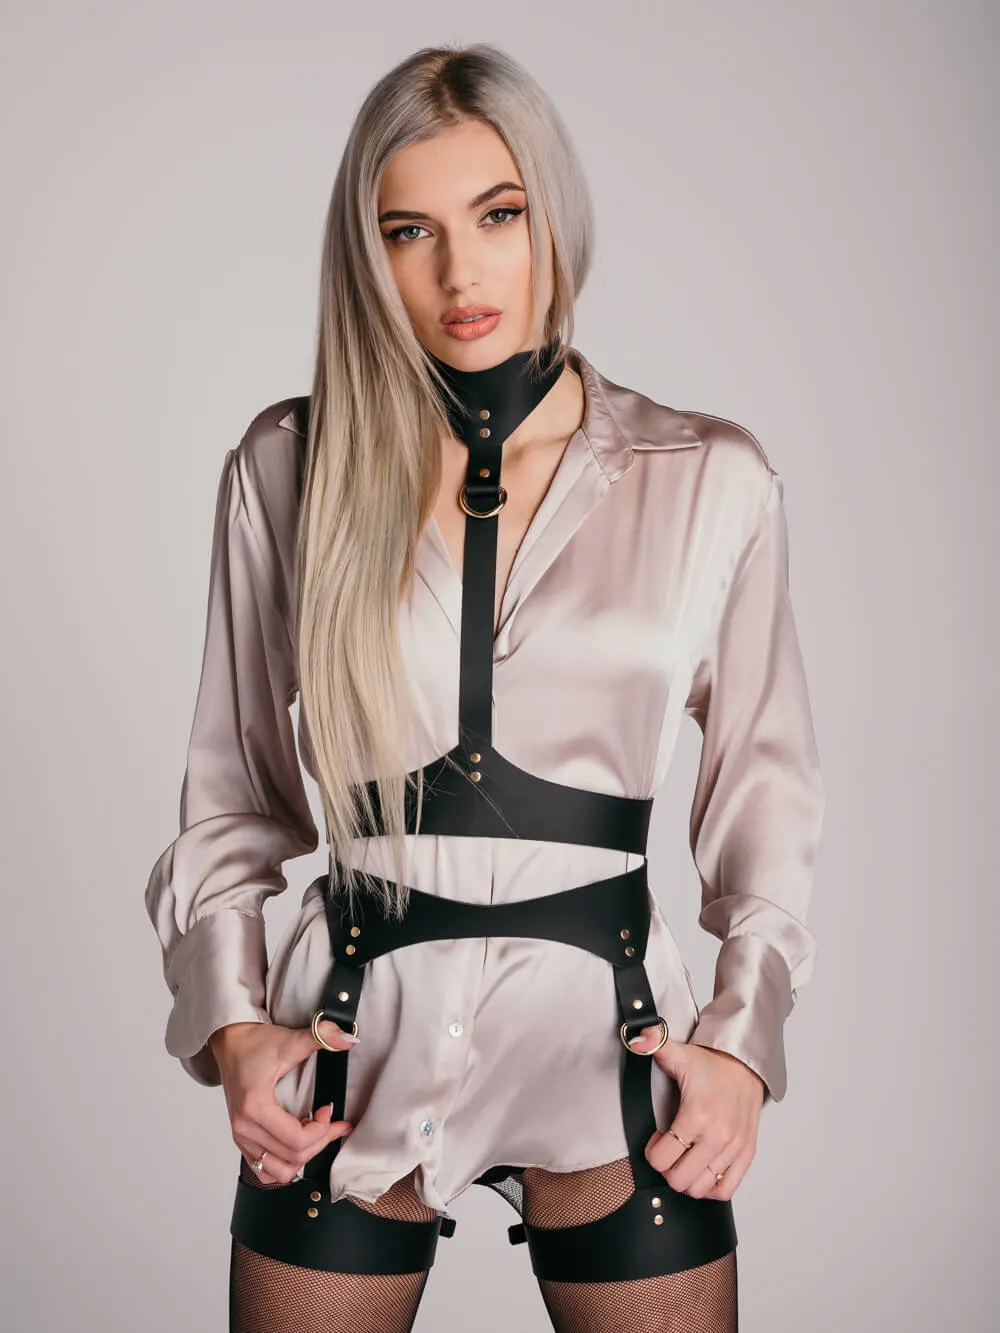 Wide leather choker with an irregular cut combined with a belt.